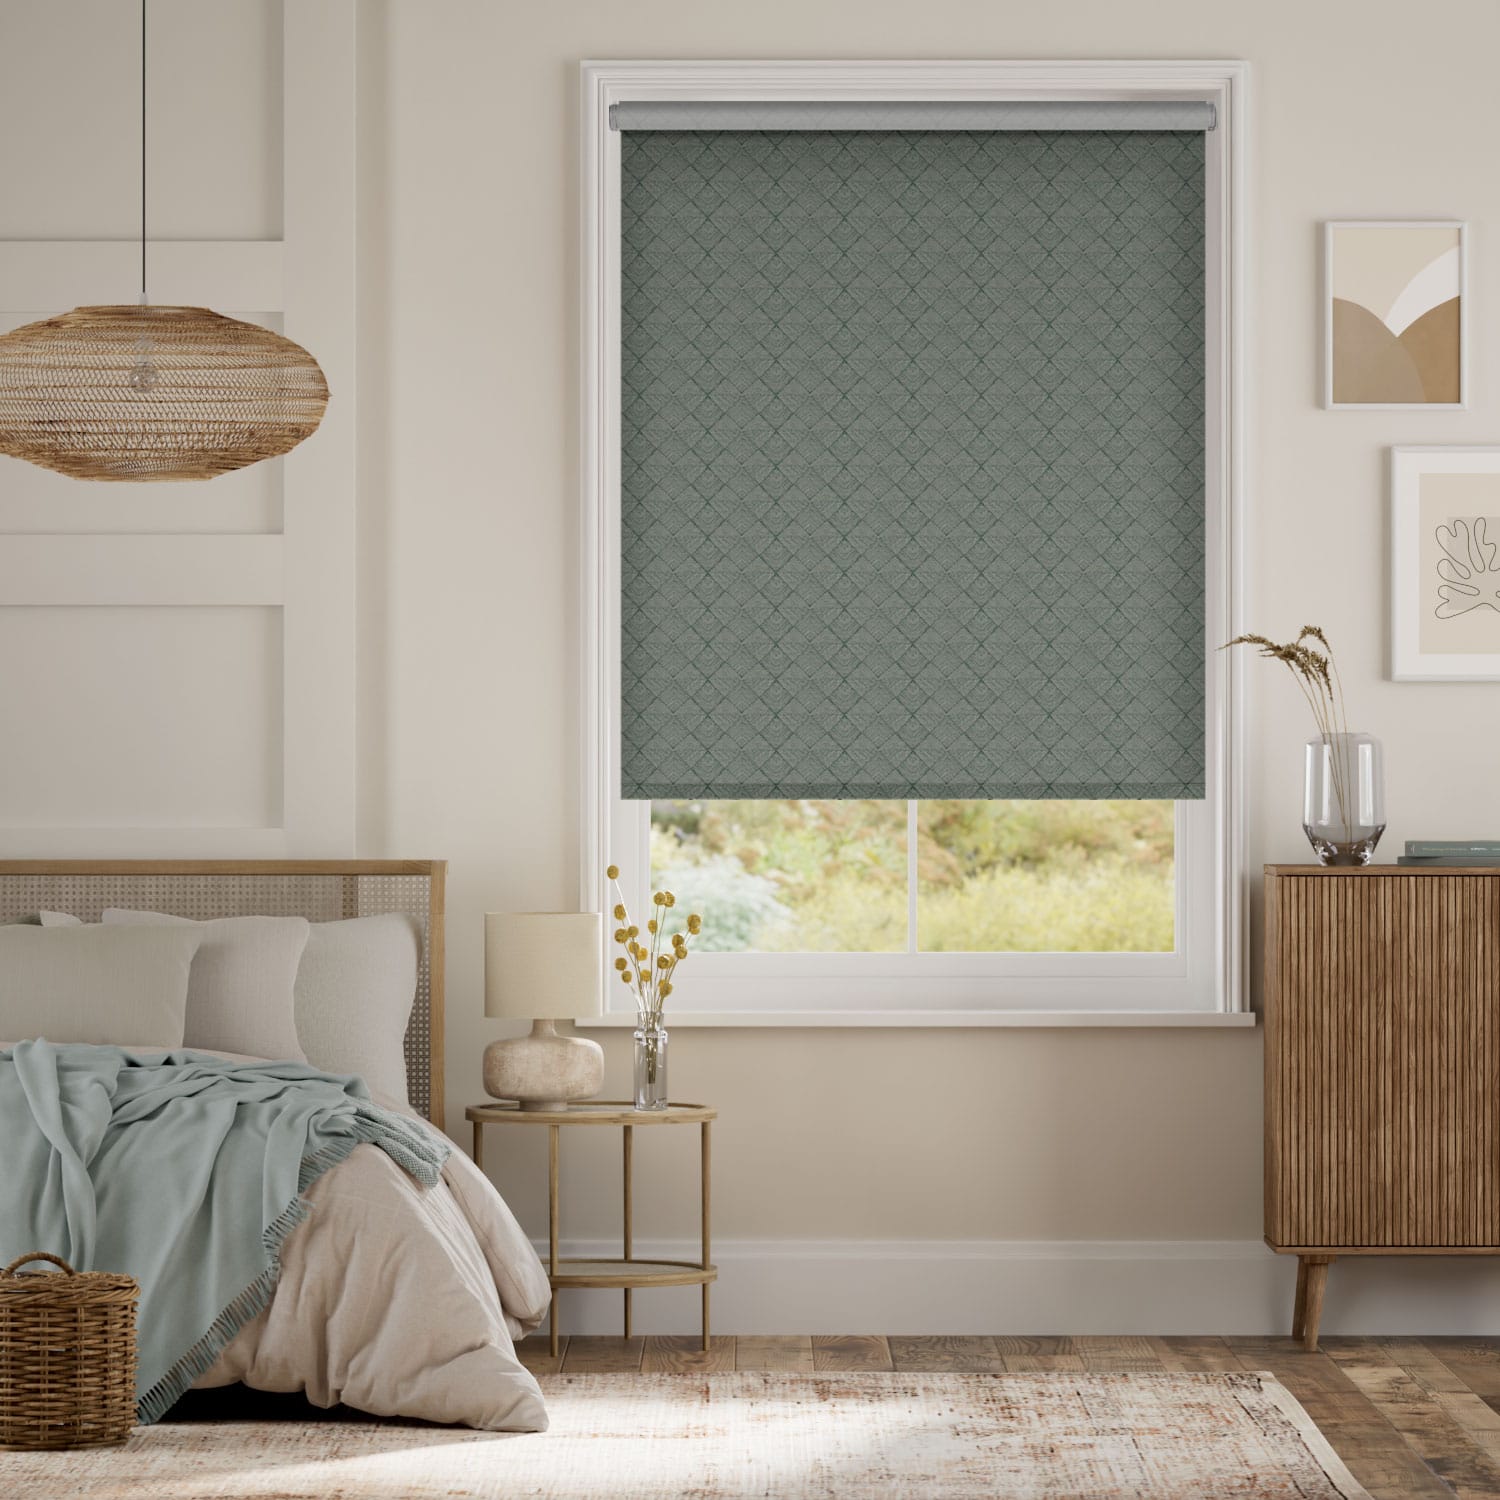 Twist2Go Choices Elysee Kingfisher Roller Blind